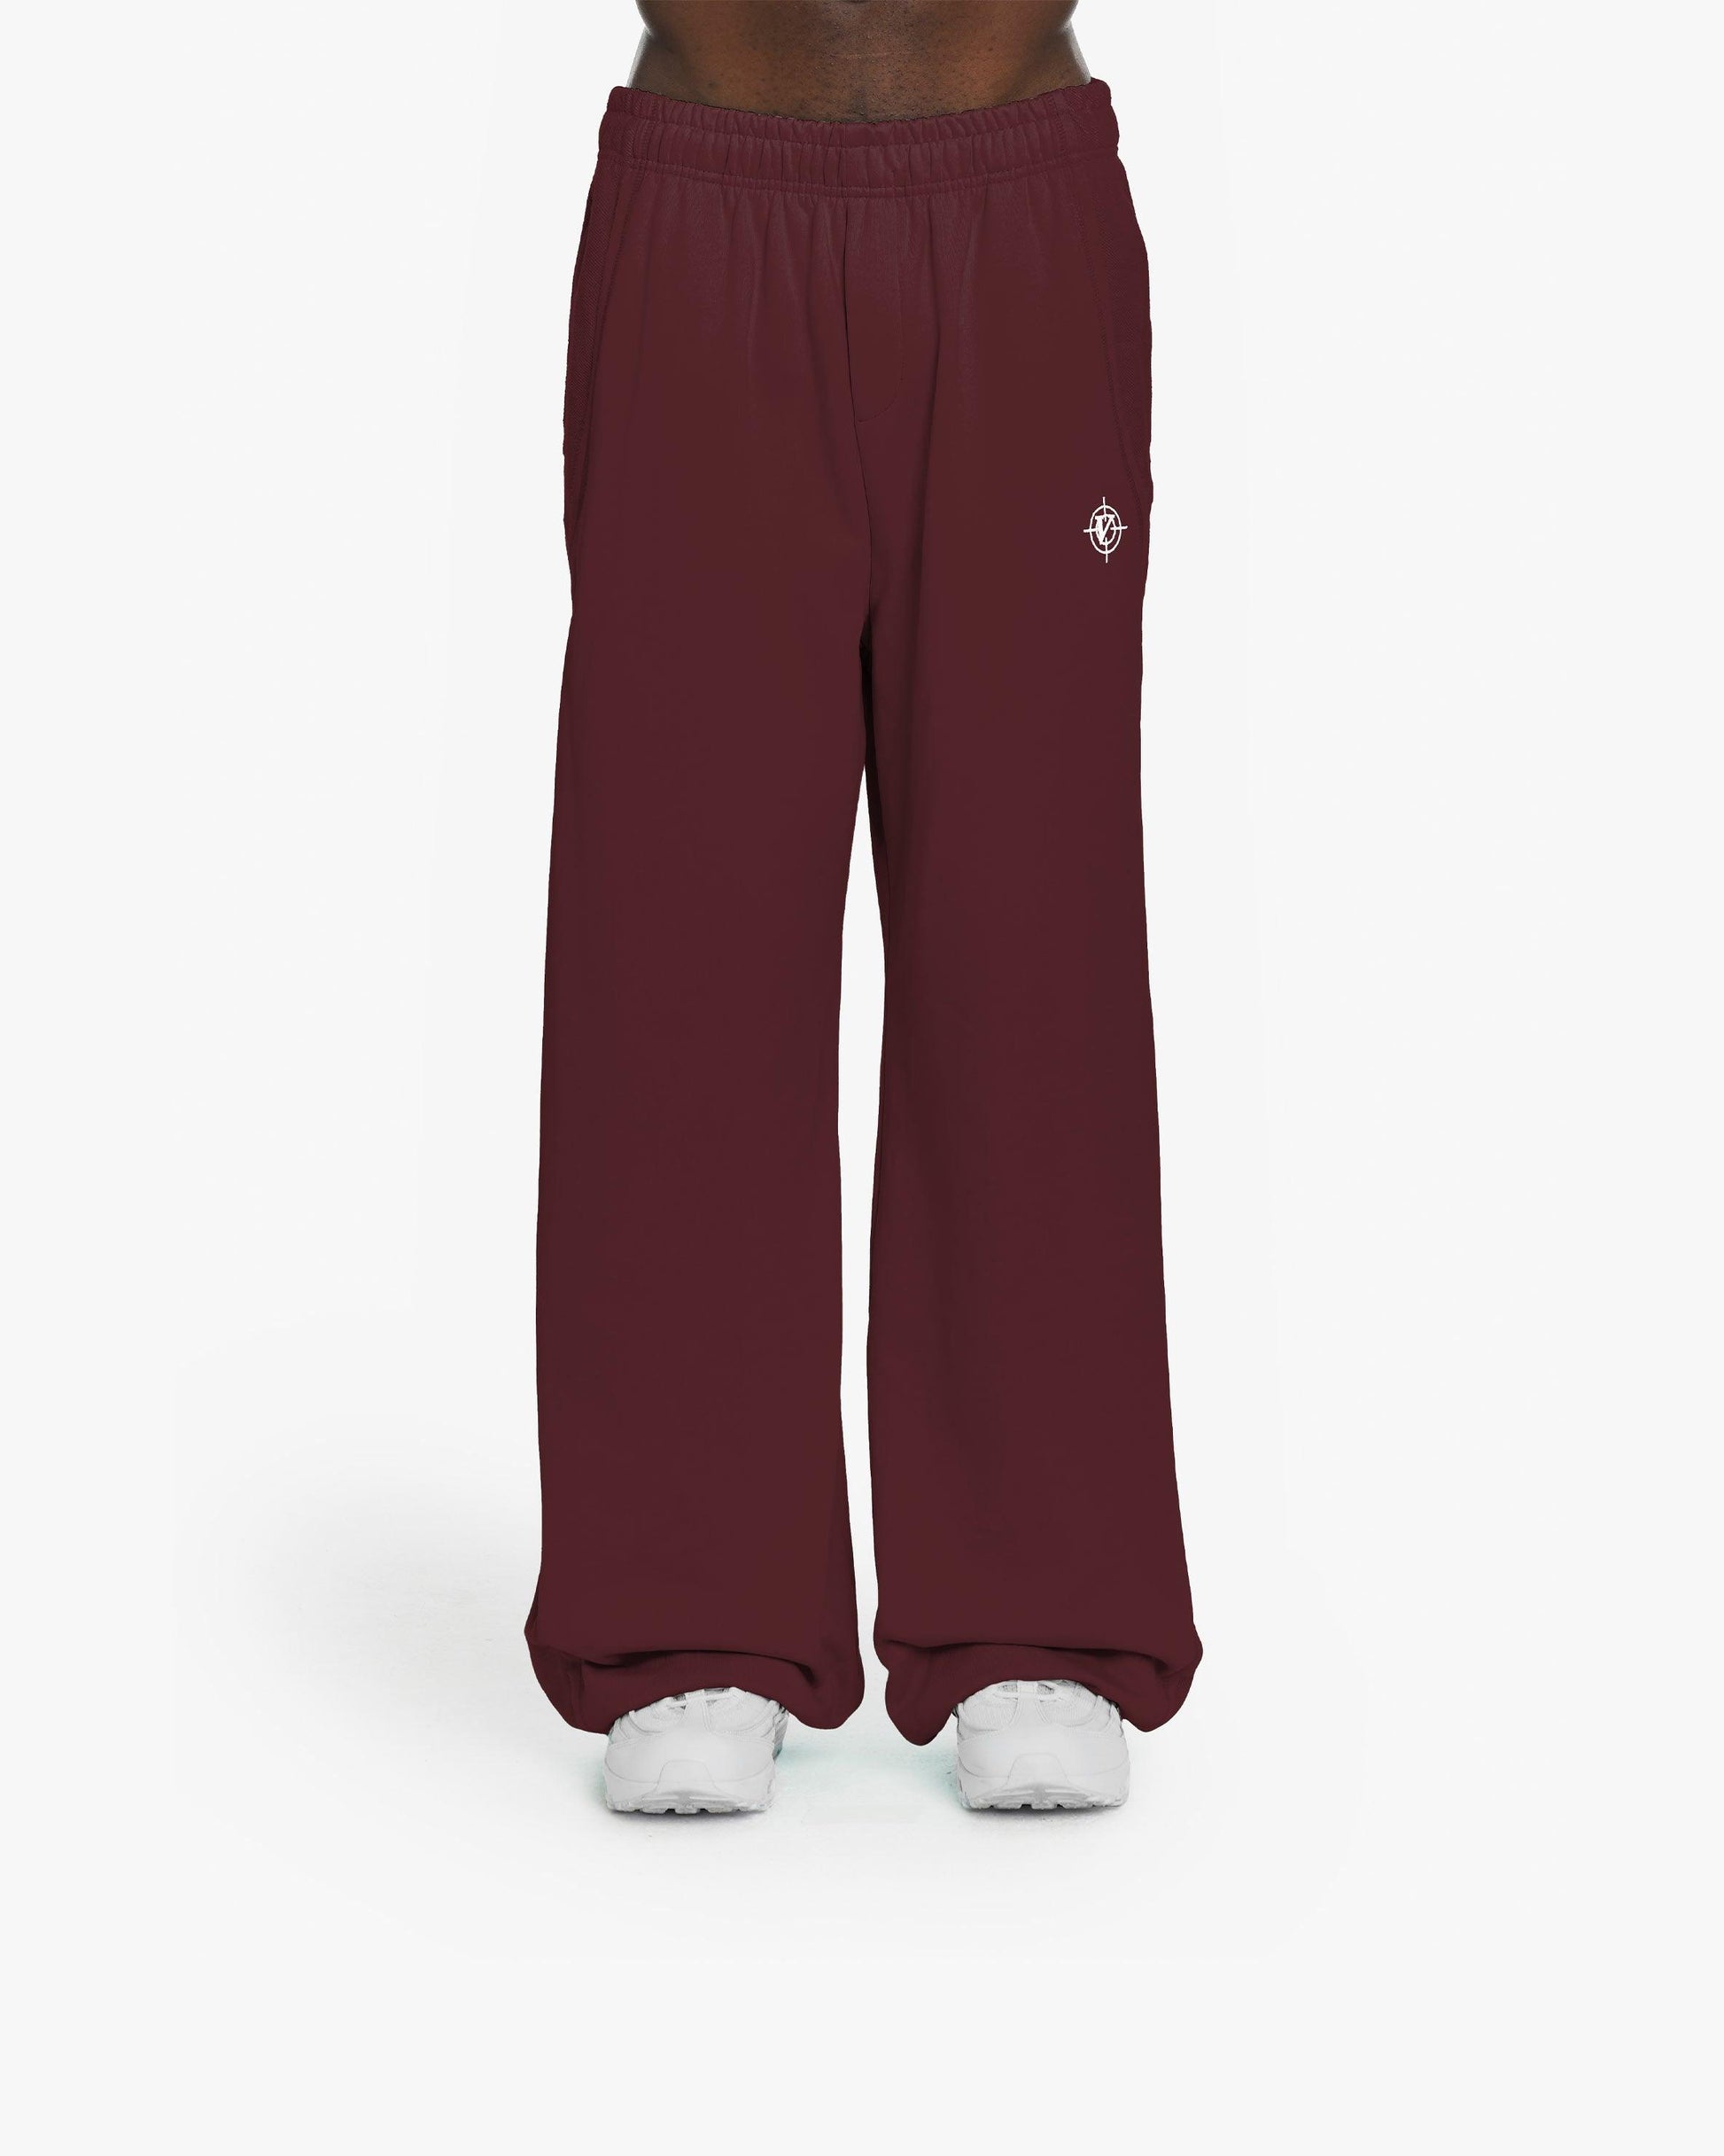 INSIDE OUT JOGGER WINE RED - VICINITY